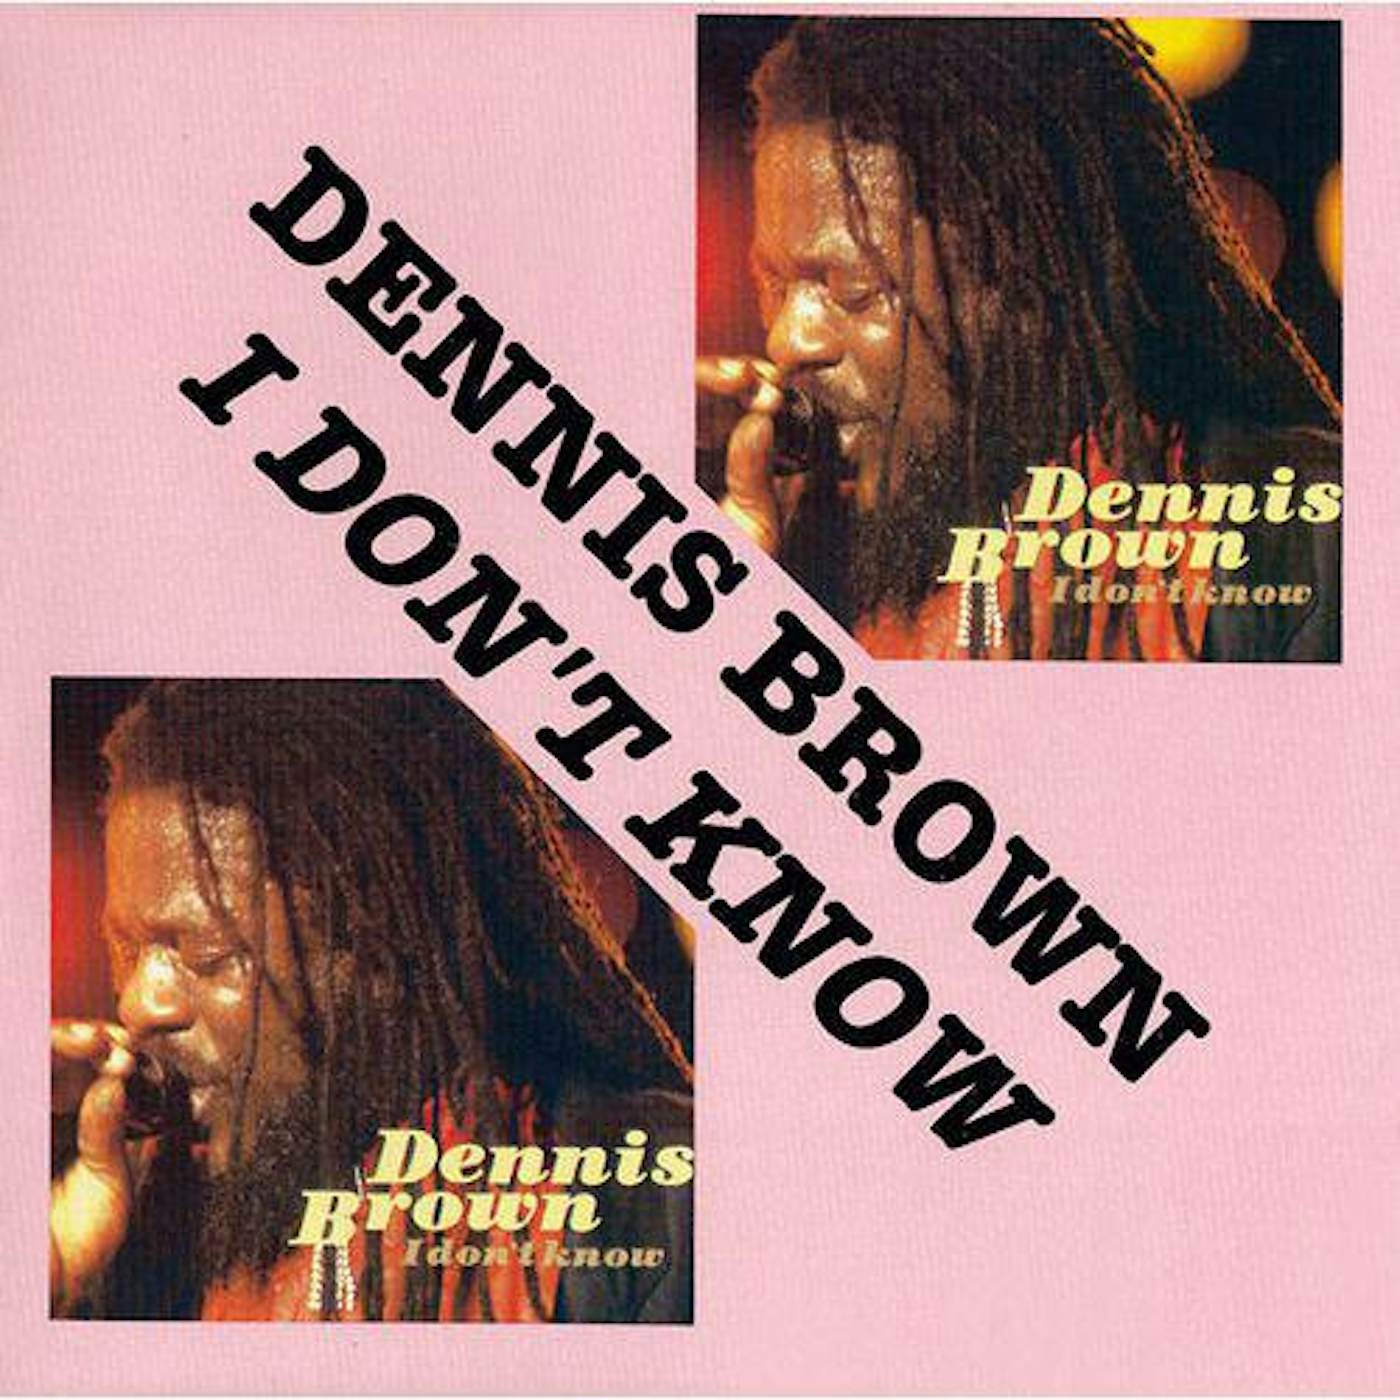 Dennis Brown I Don't Know Vinyl Record